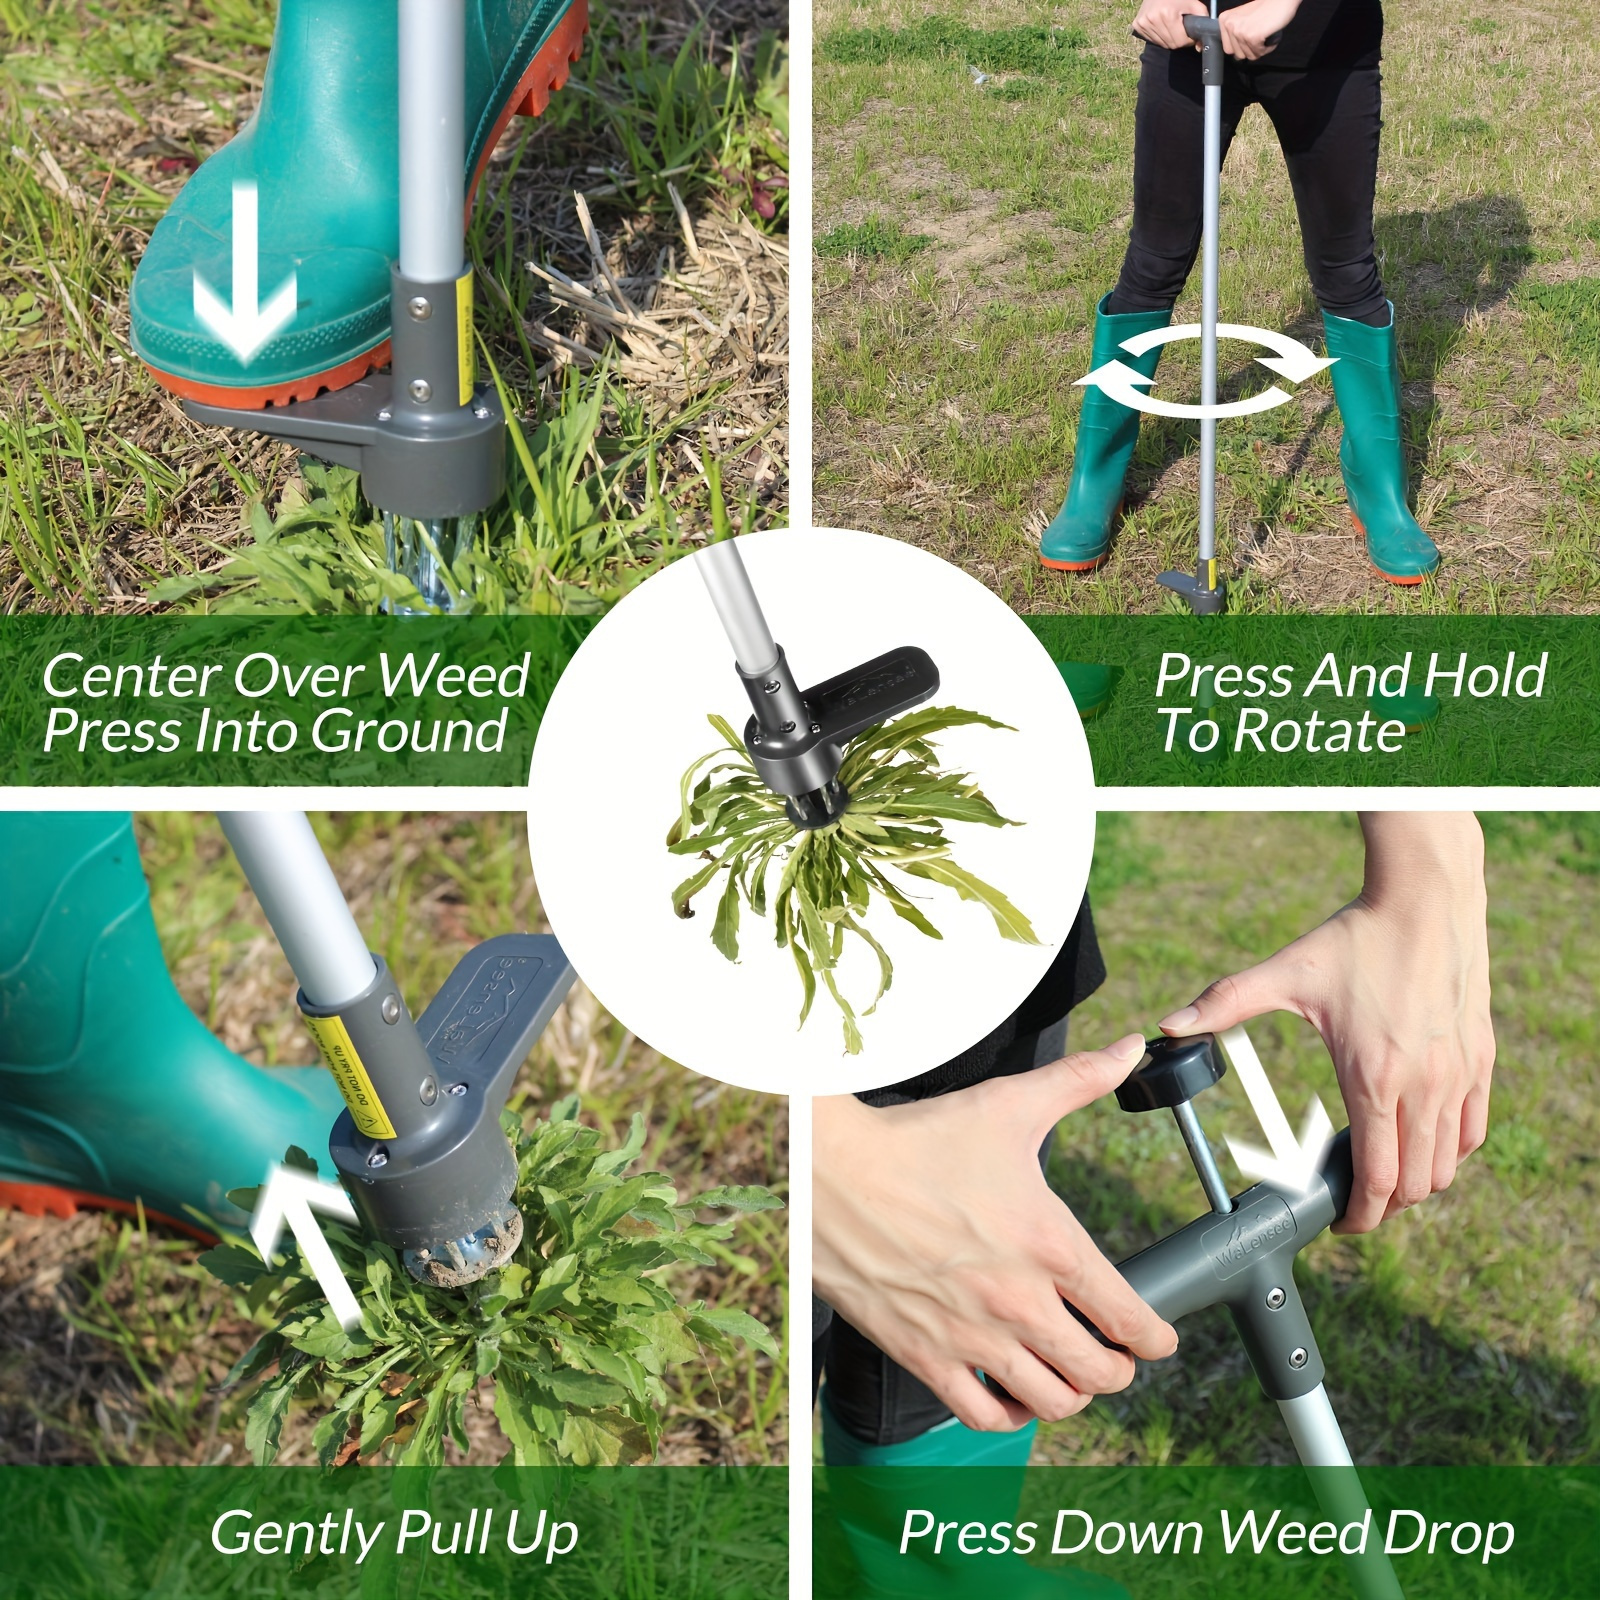 

Ergonomic Stand-up Puller With 5-claw Design - Long Handle, Foot Pedal For Easy Root Removal & Dandelion Control - Durable Pp Material, No Batteries Required